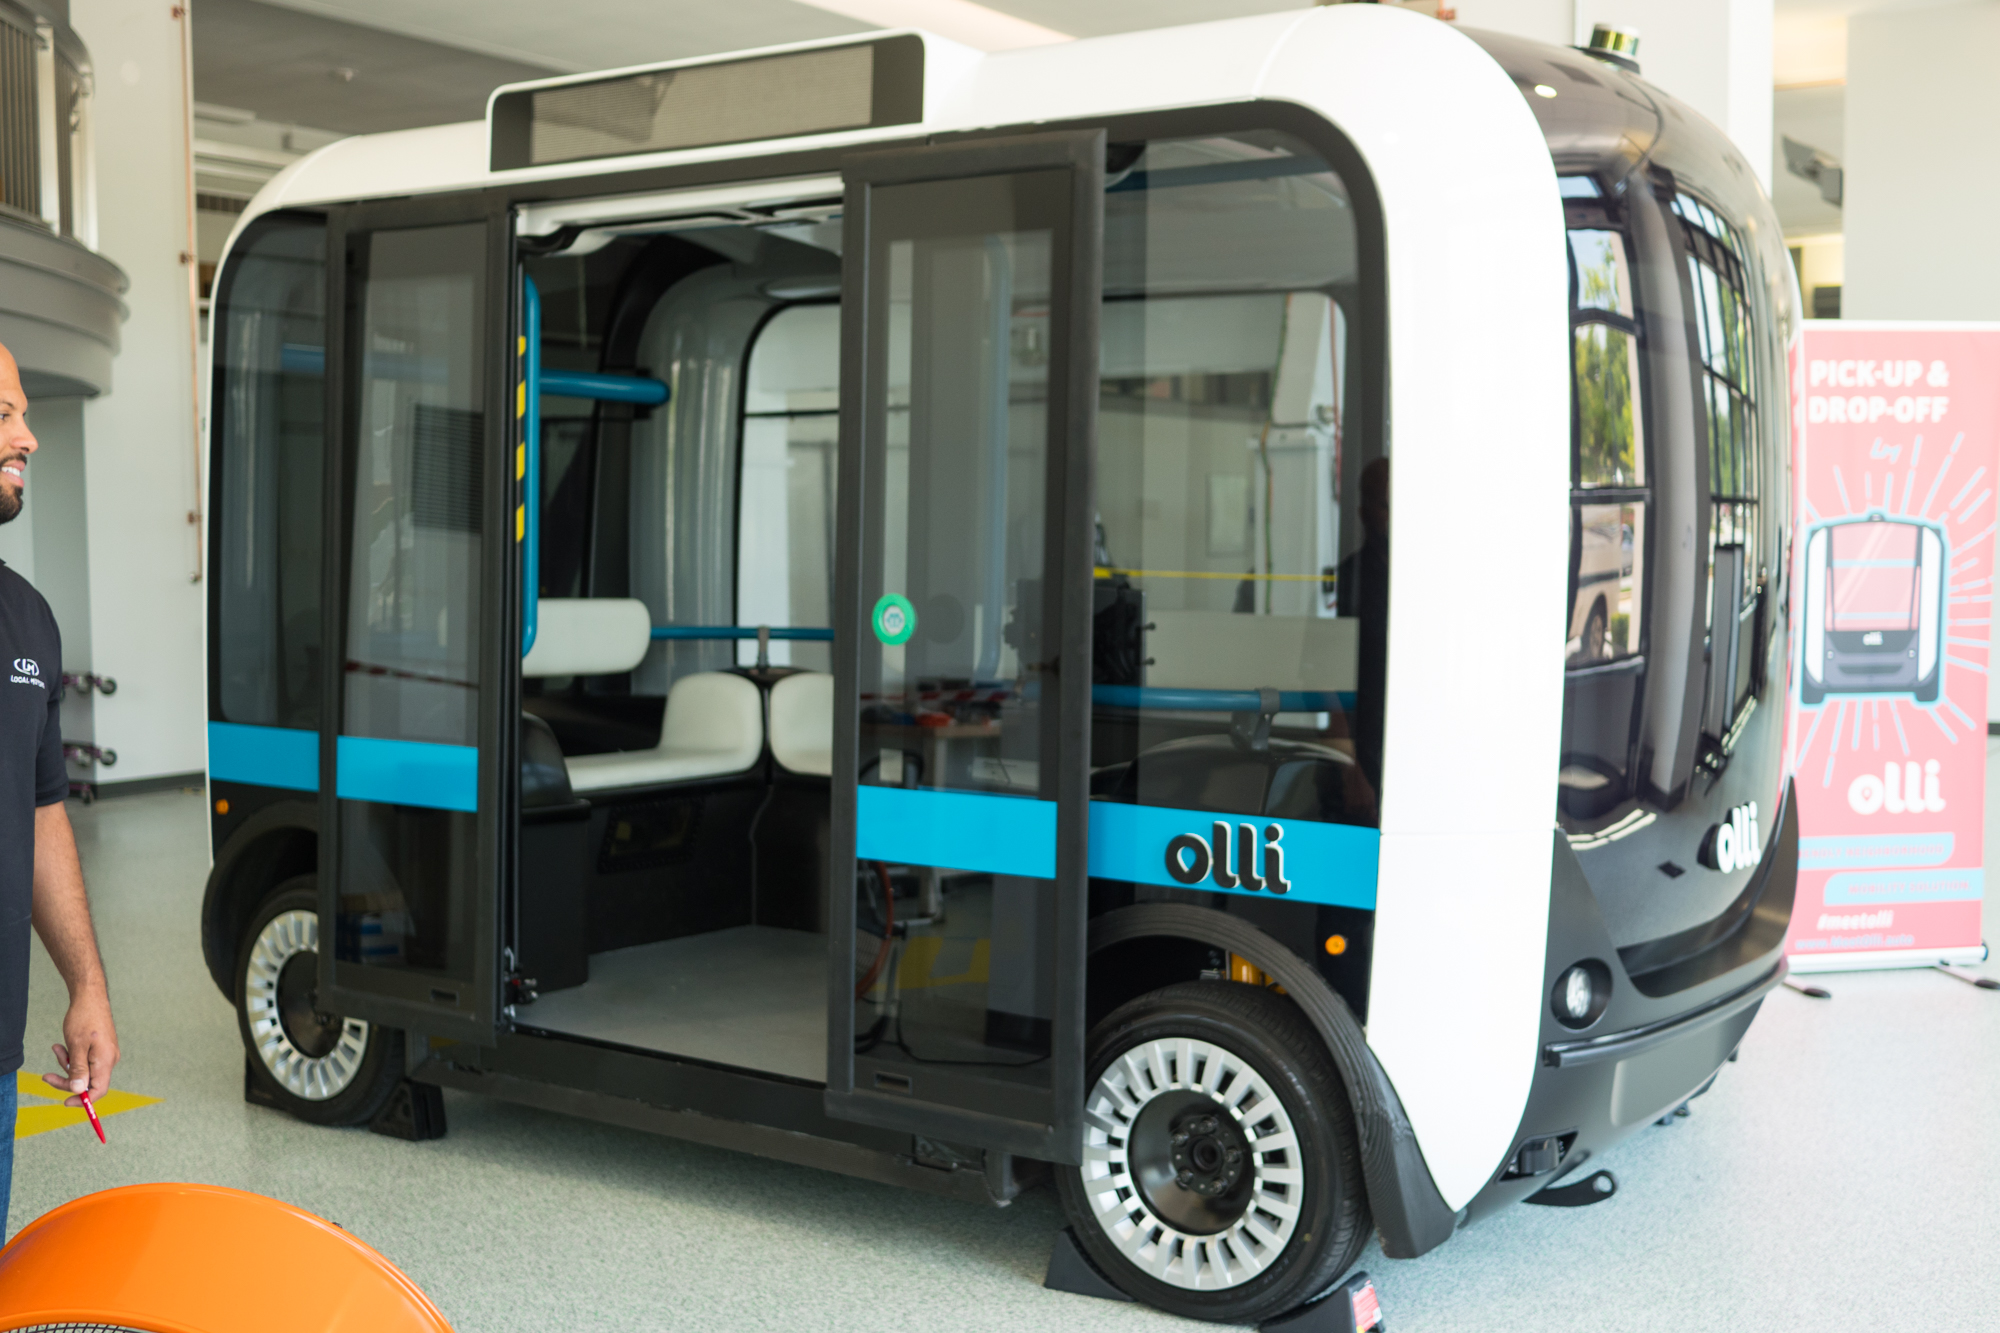 Meet Olli, the autonomous electric people mover from Local Motors Ars